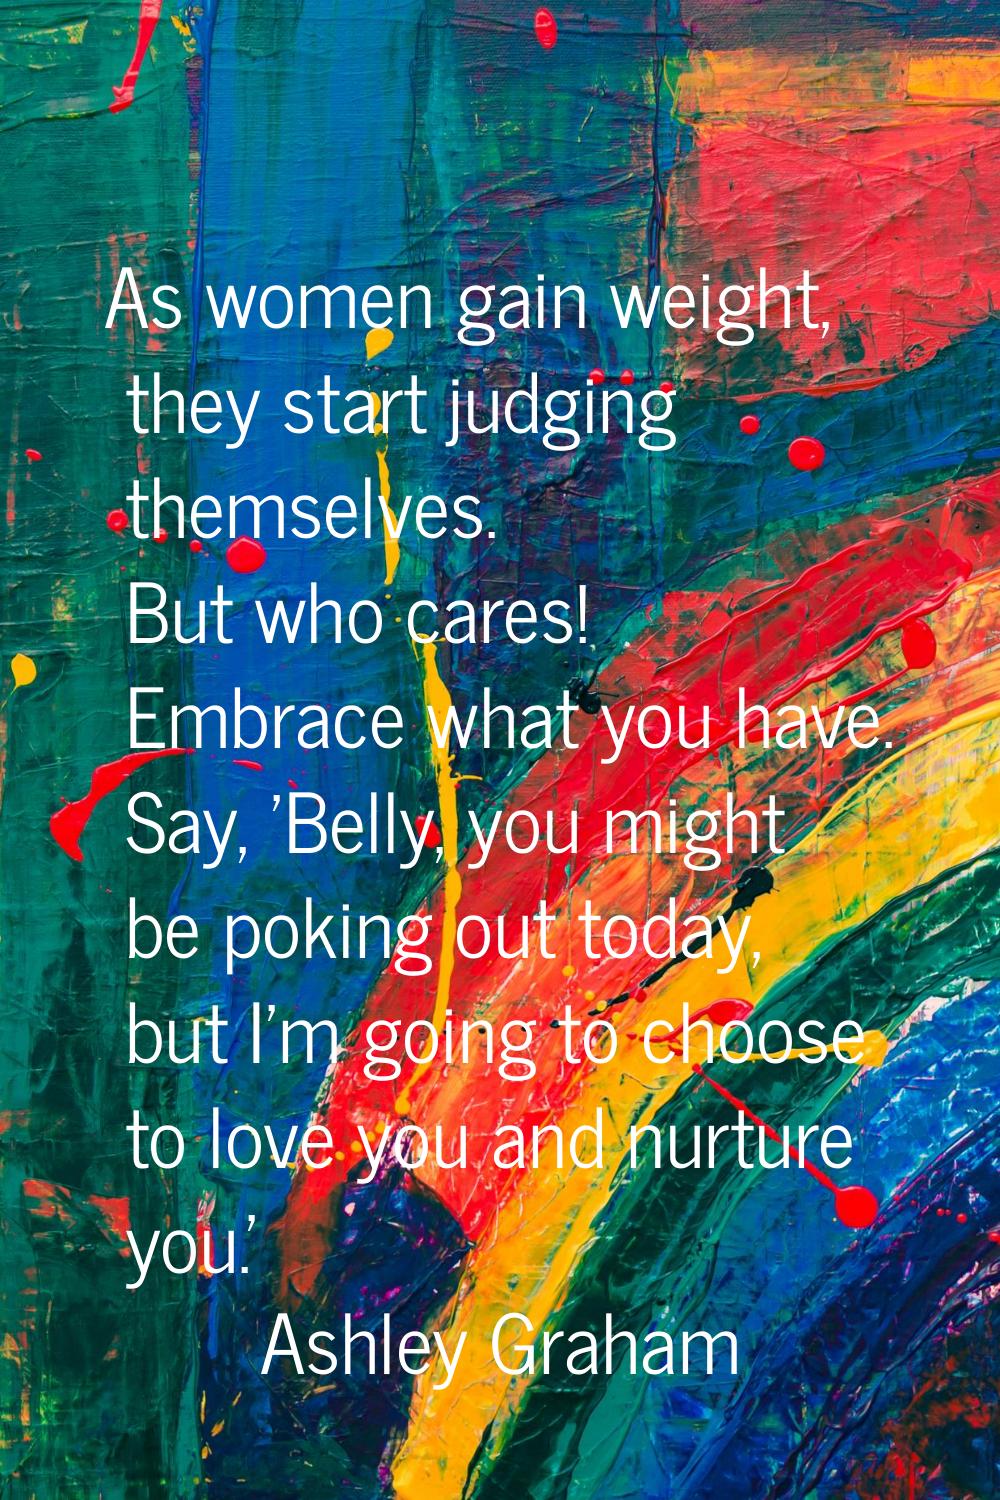 As women gain weight, they start judging themselves. But who cares! Embrace what you have. Say, 'Be